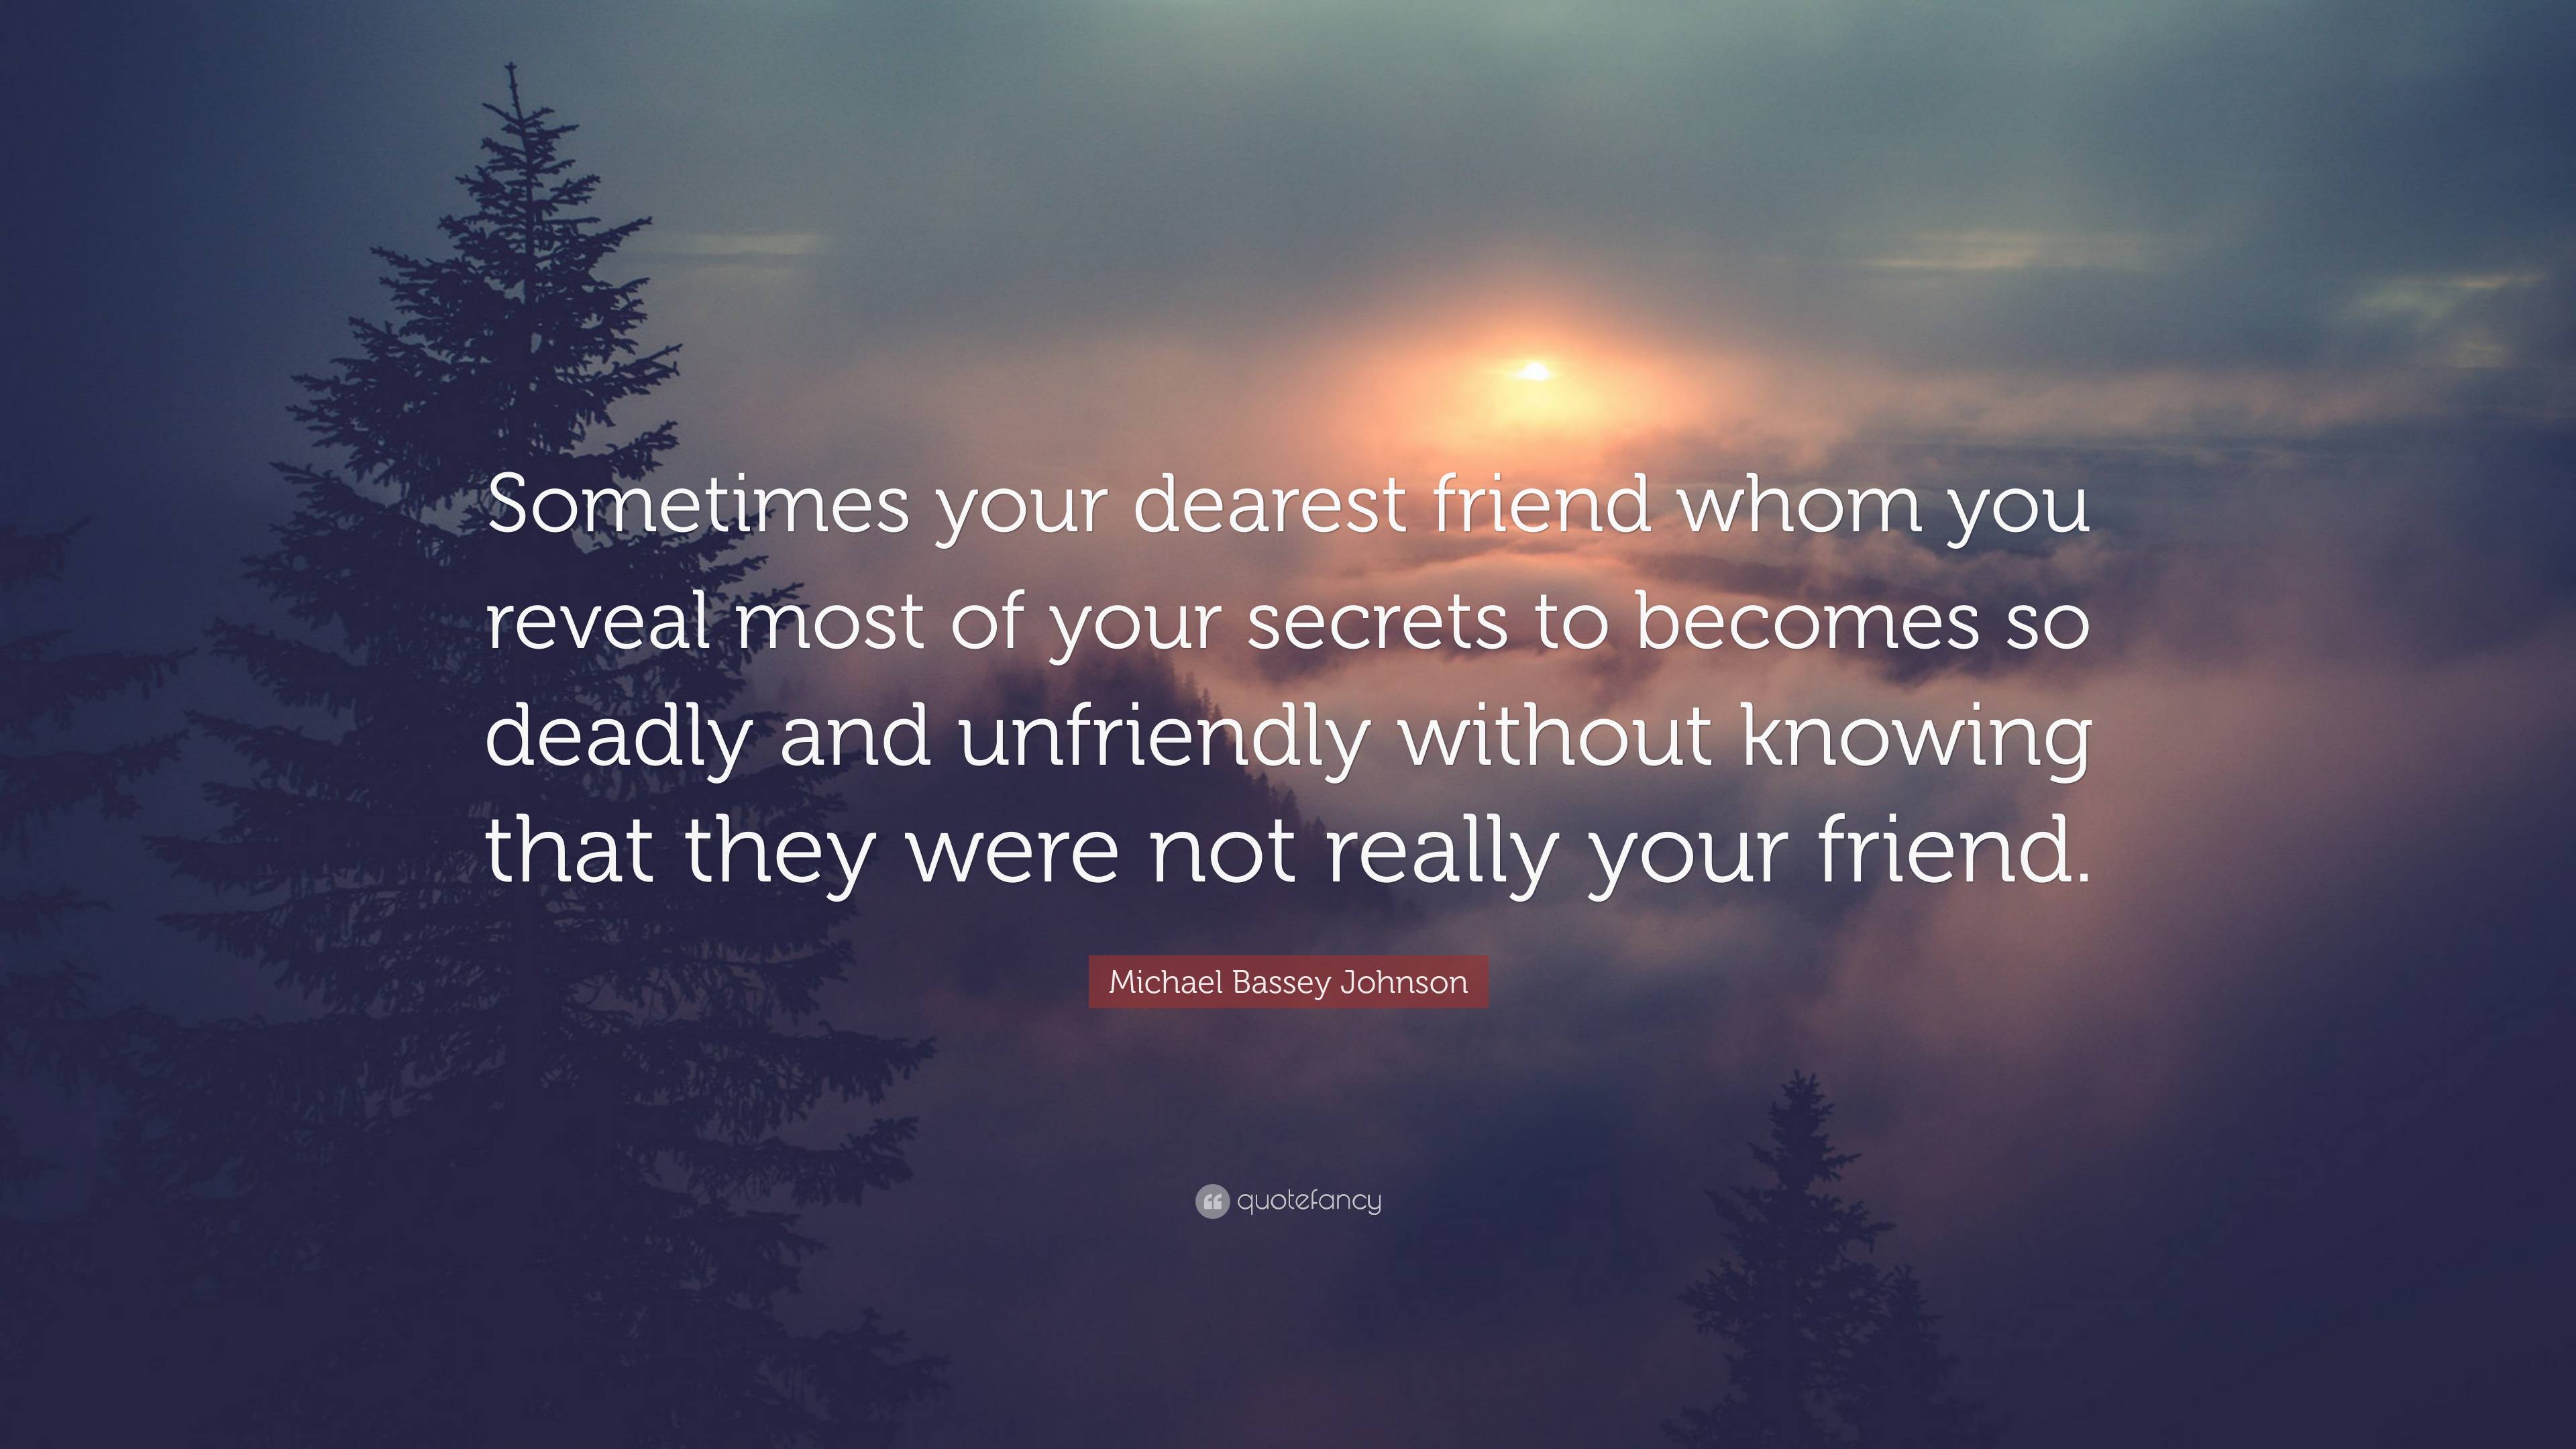 Michael Bassey Johnson Quote: “Sometimes your dearest friend whom you ...